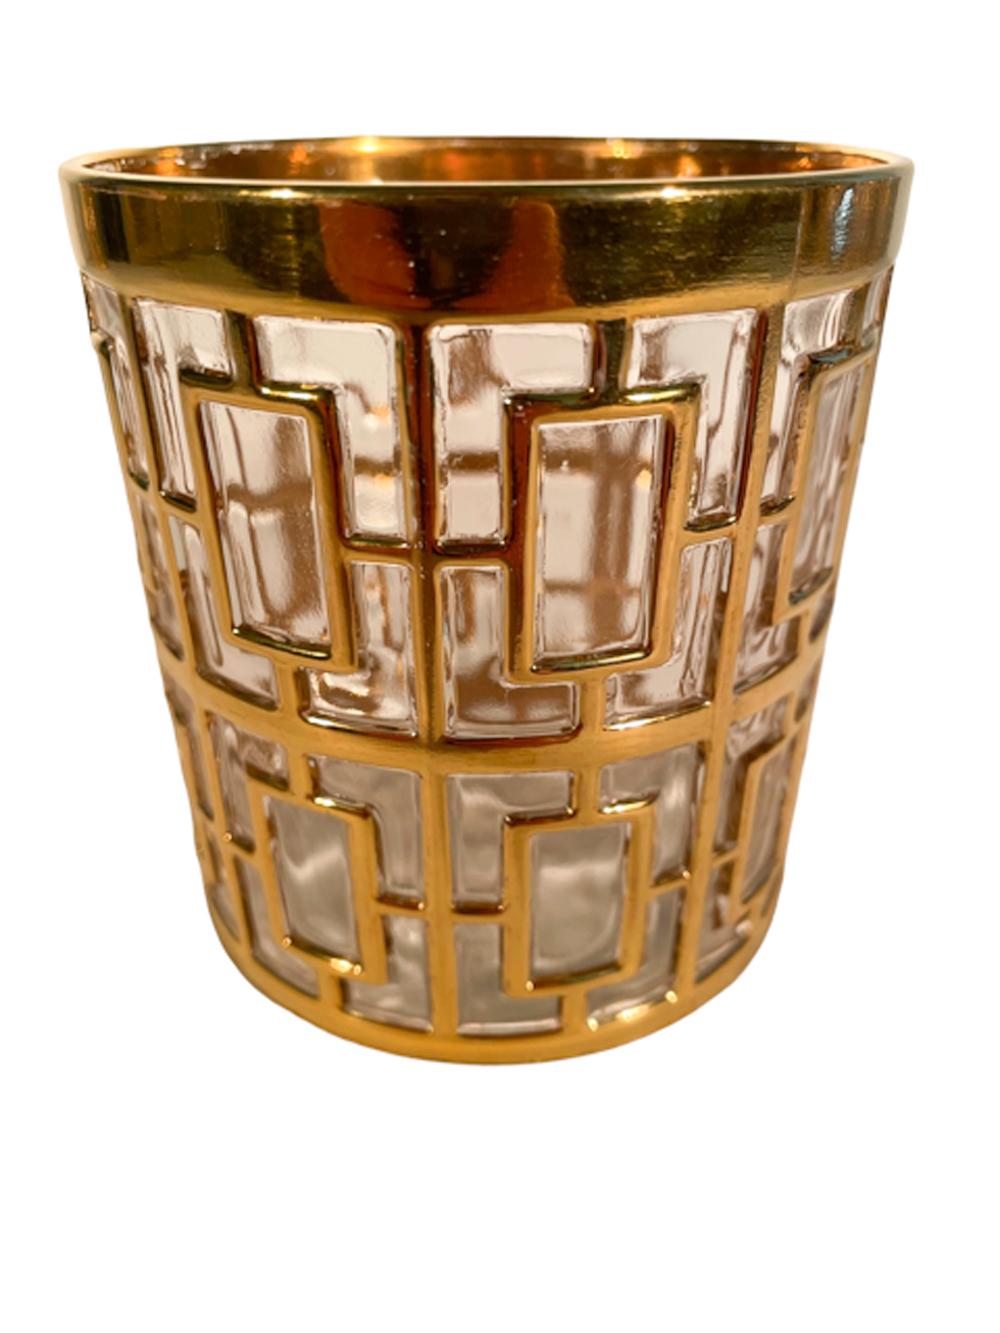 American Mid-Century Modern Rocks Glasses by Imperial Glass in the Shoji Pattern For Sale